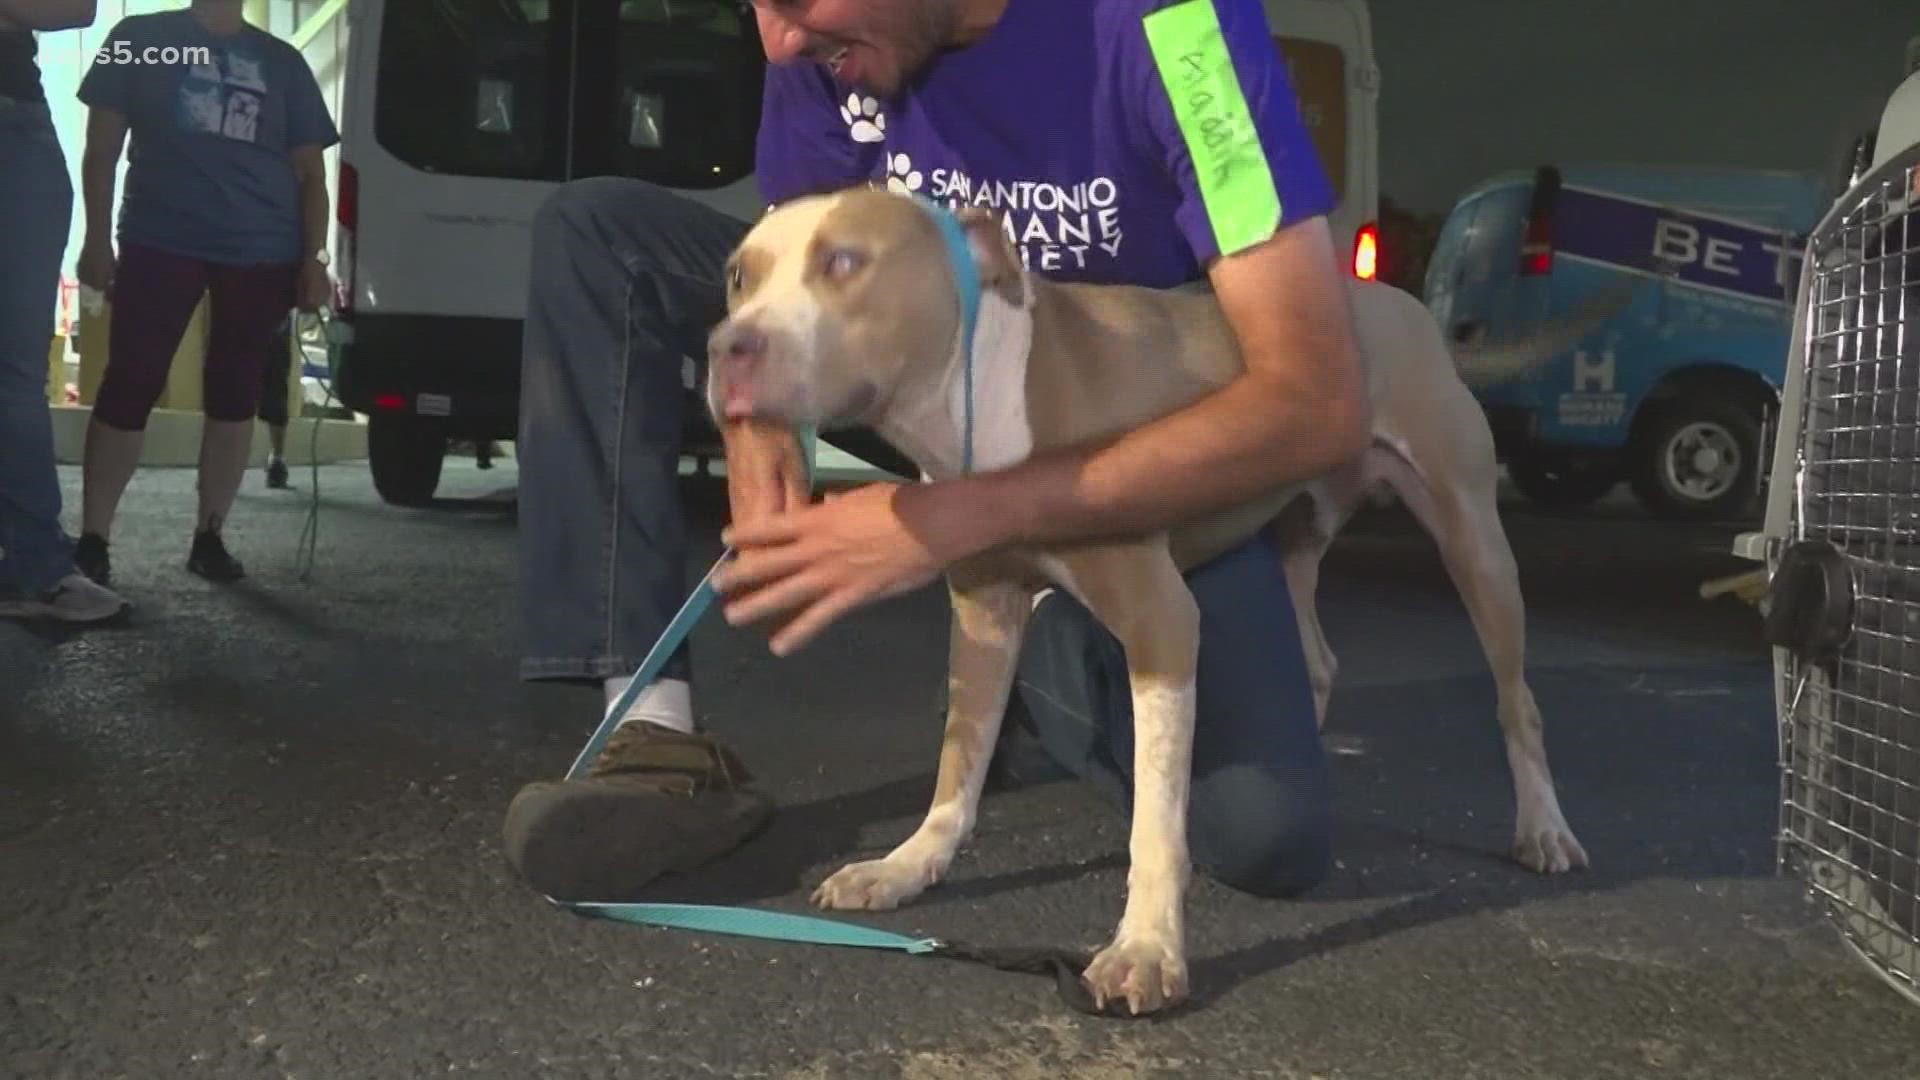 Volunteers brought in 85 cats and 55 dogs early Thursday morning from Louisiana. The San Antonio Humane Society is in dire need of pet supply donations right now.